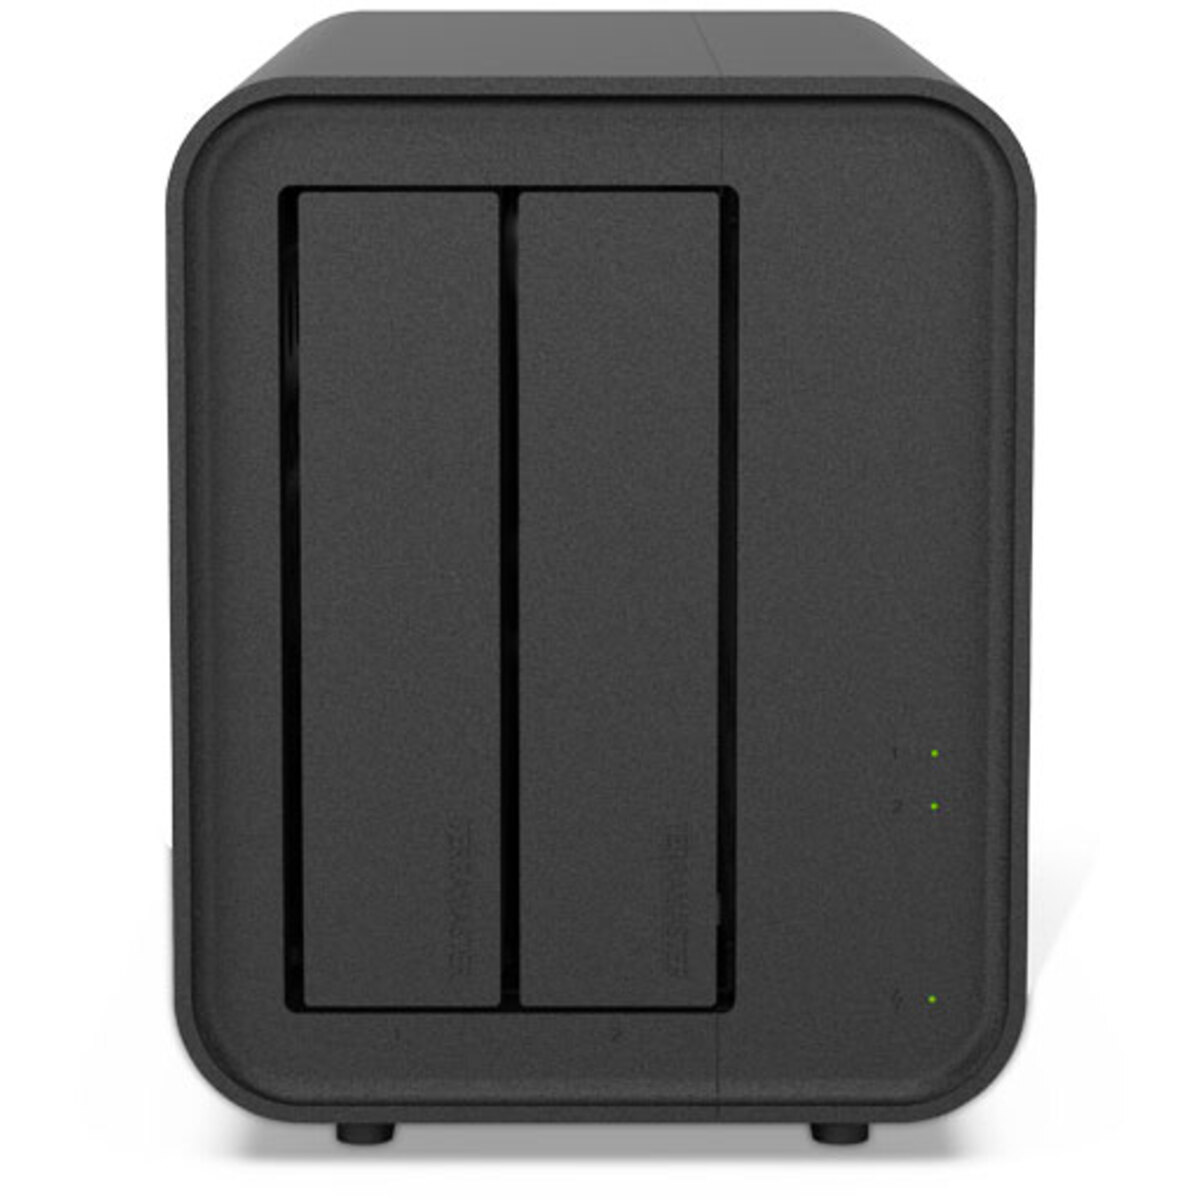 TerraMaster F2-424 20tb 2-Bay Desktop Multimedia / Power User / Business NAS - Network Attached Storage Device 2x10tb Seagate IronWolf Pro ST10000NT001 3.5 7200rpm SATA 6Gb/s HDD NAS Class Drives Installed - Burn-In Tested - ON SALE F2-424